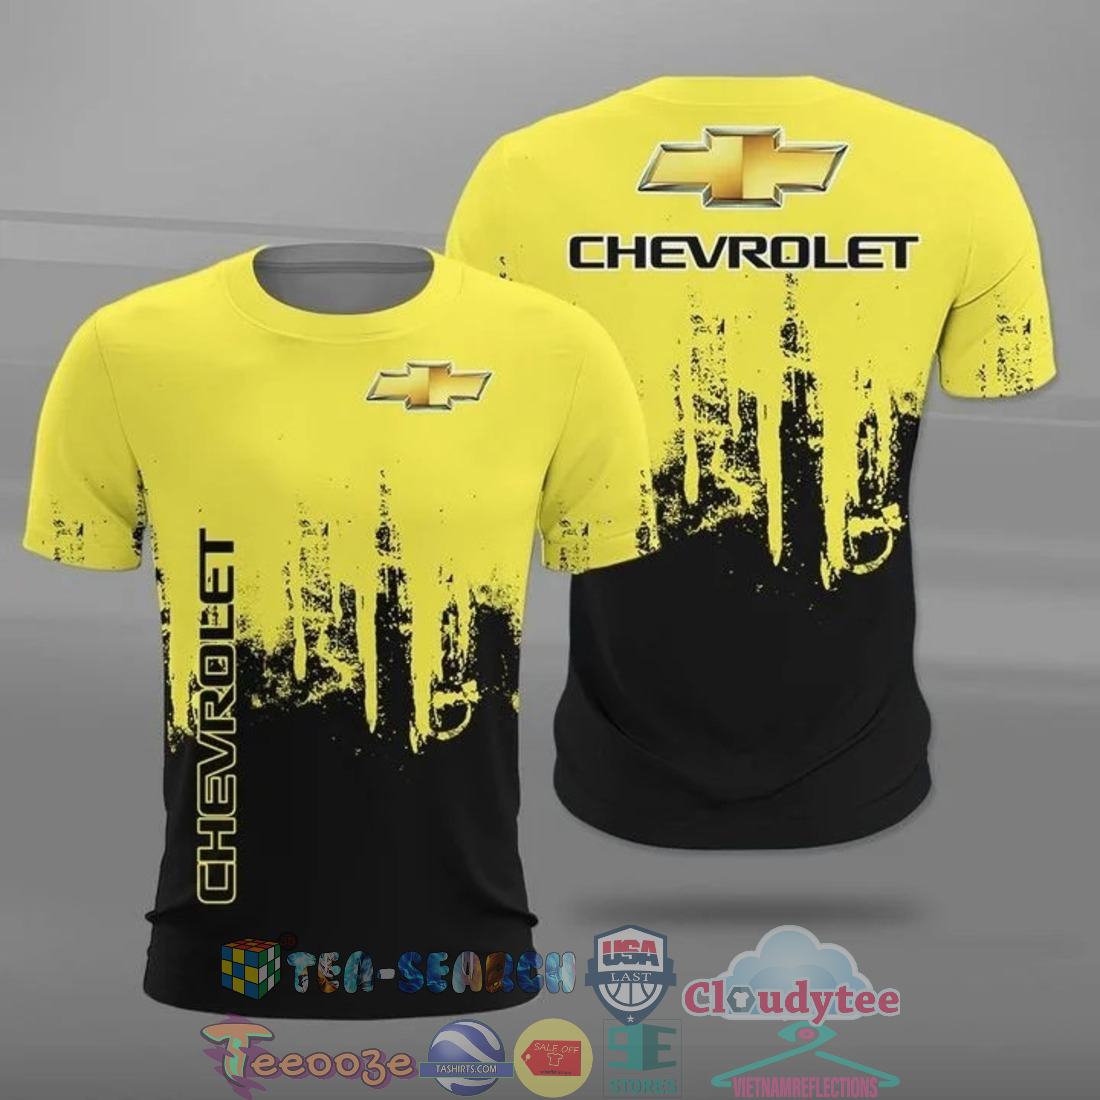 Chevrolet ver 2 all over printed t-shirt hoodie